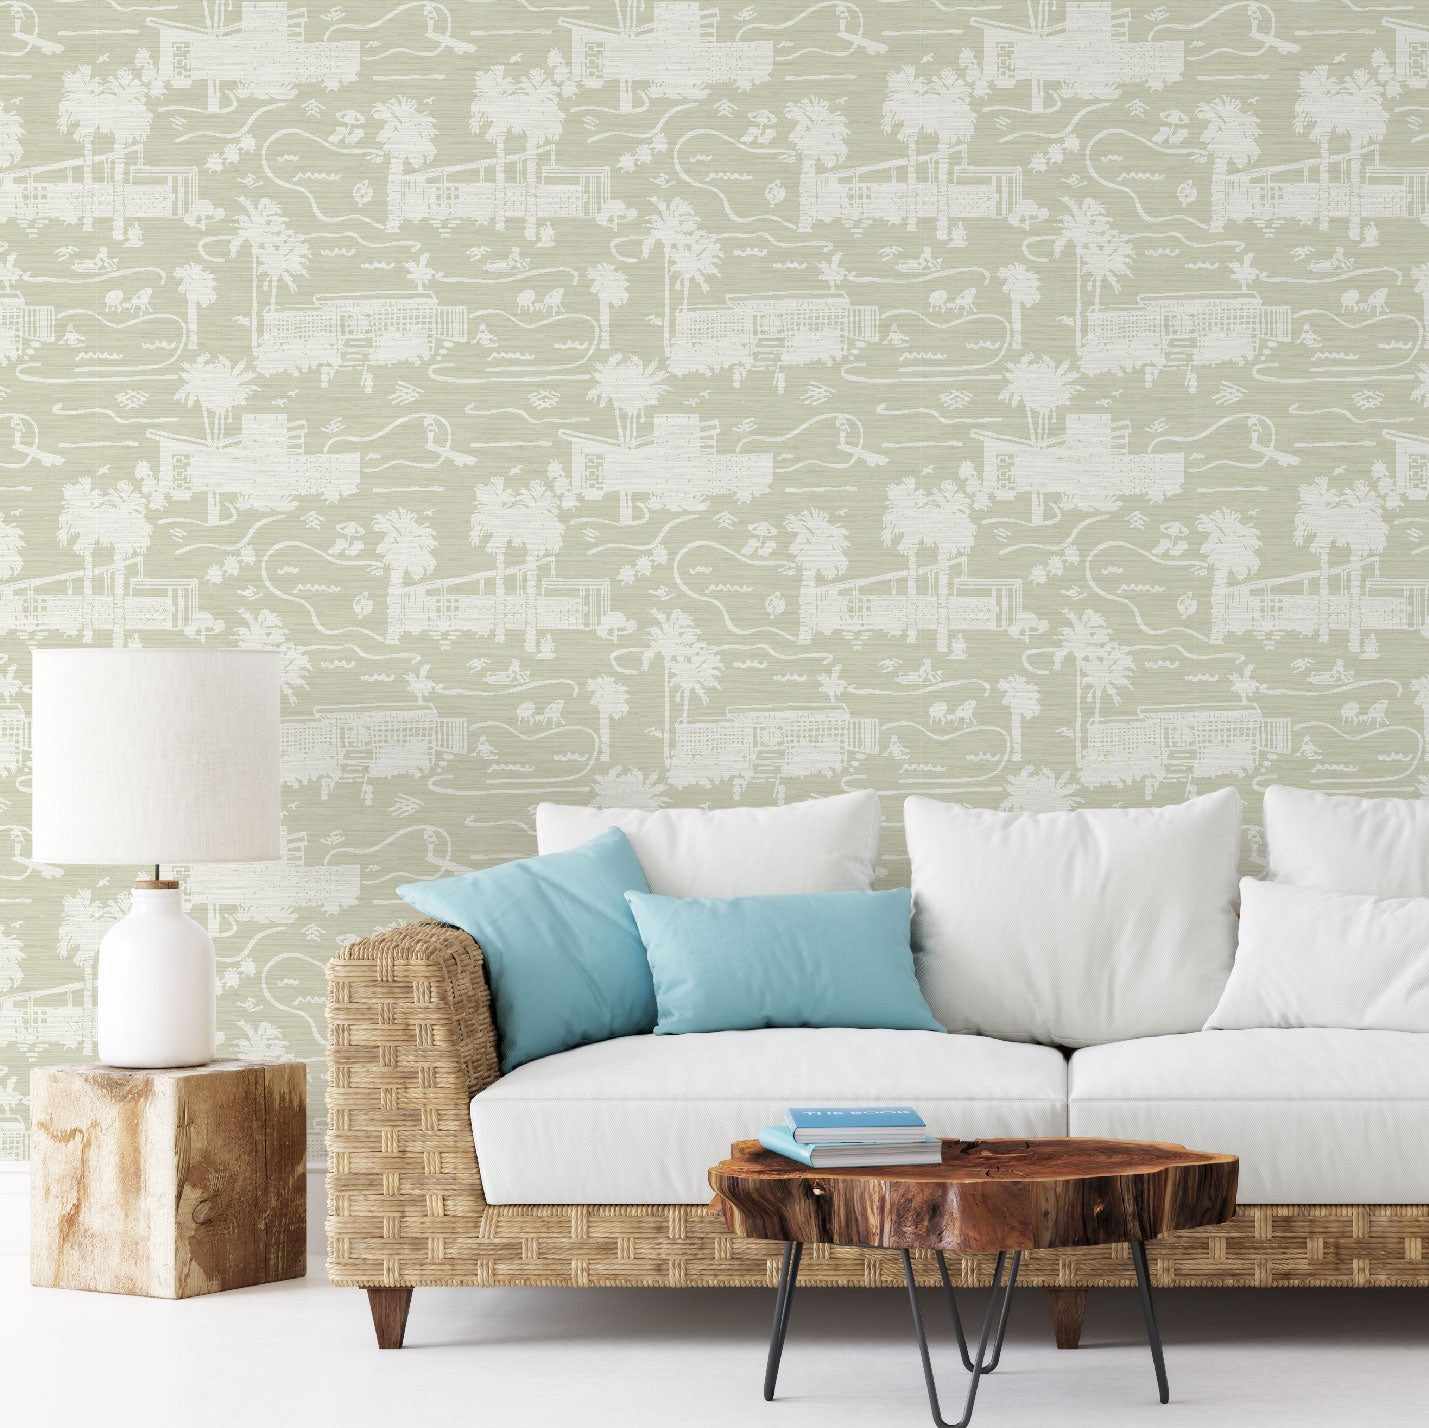 Load image into Gallery viewer, living room with grasscloth toile printed wallpaper with mid century modern houses inspired by palm springs featuring swimming pools, palm trees and secret suntanning ladies in this hand drawn one color printed design with tan base and white print
